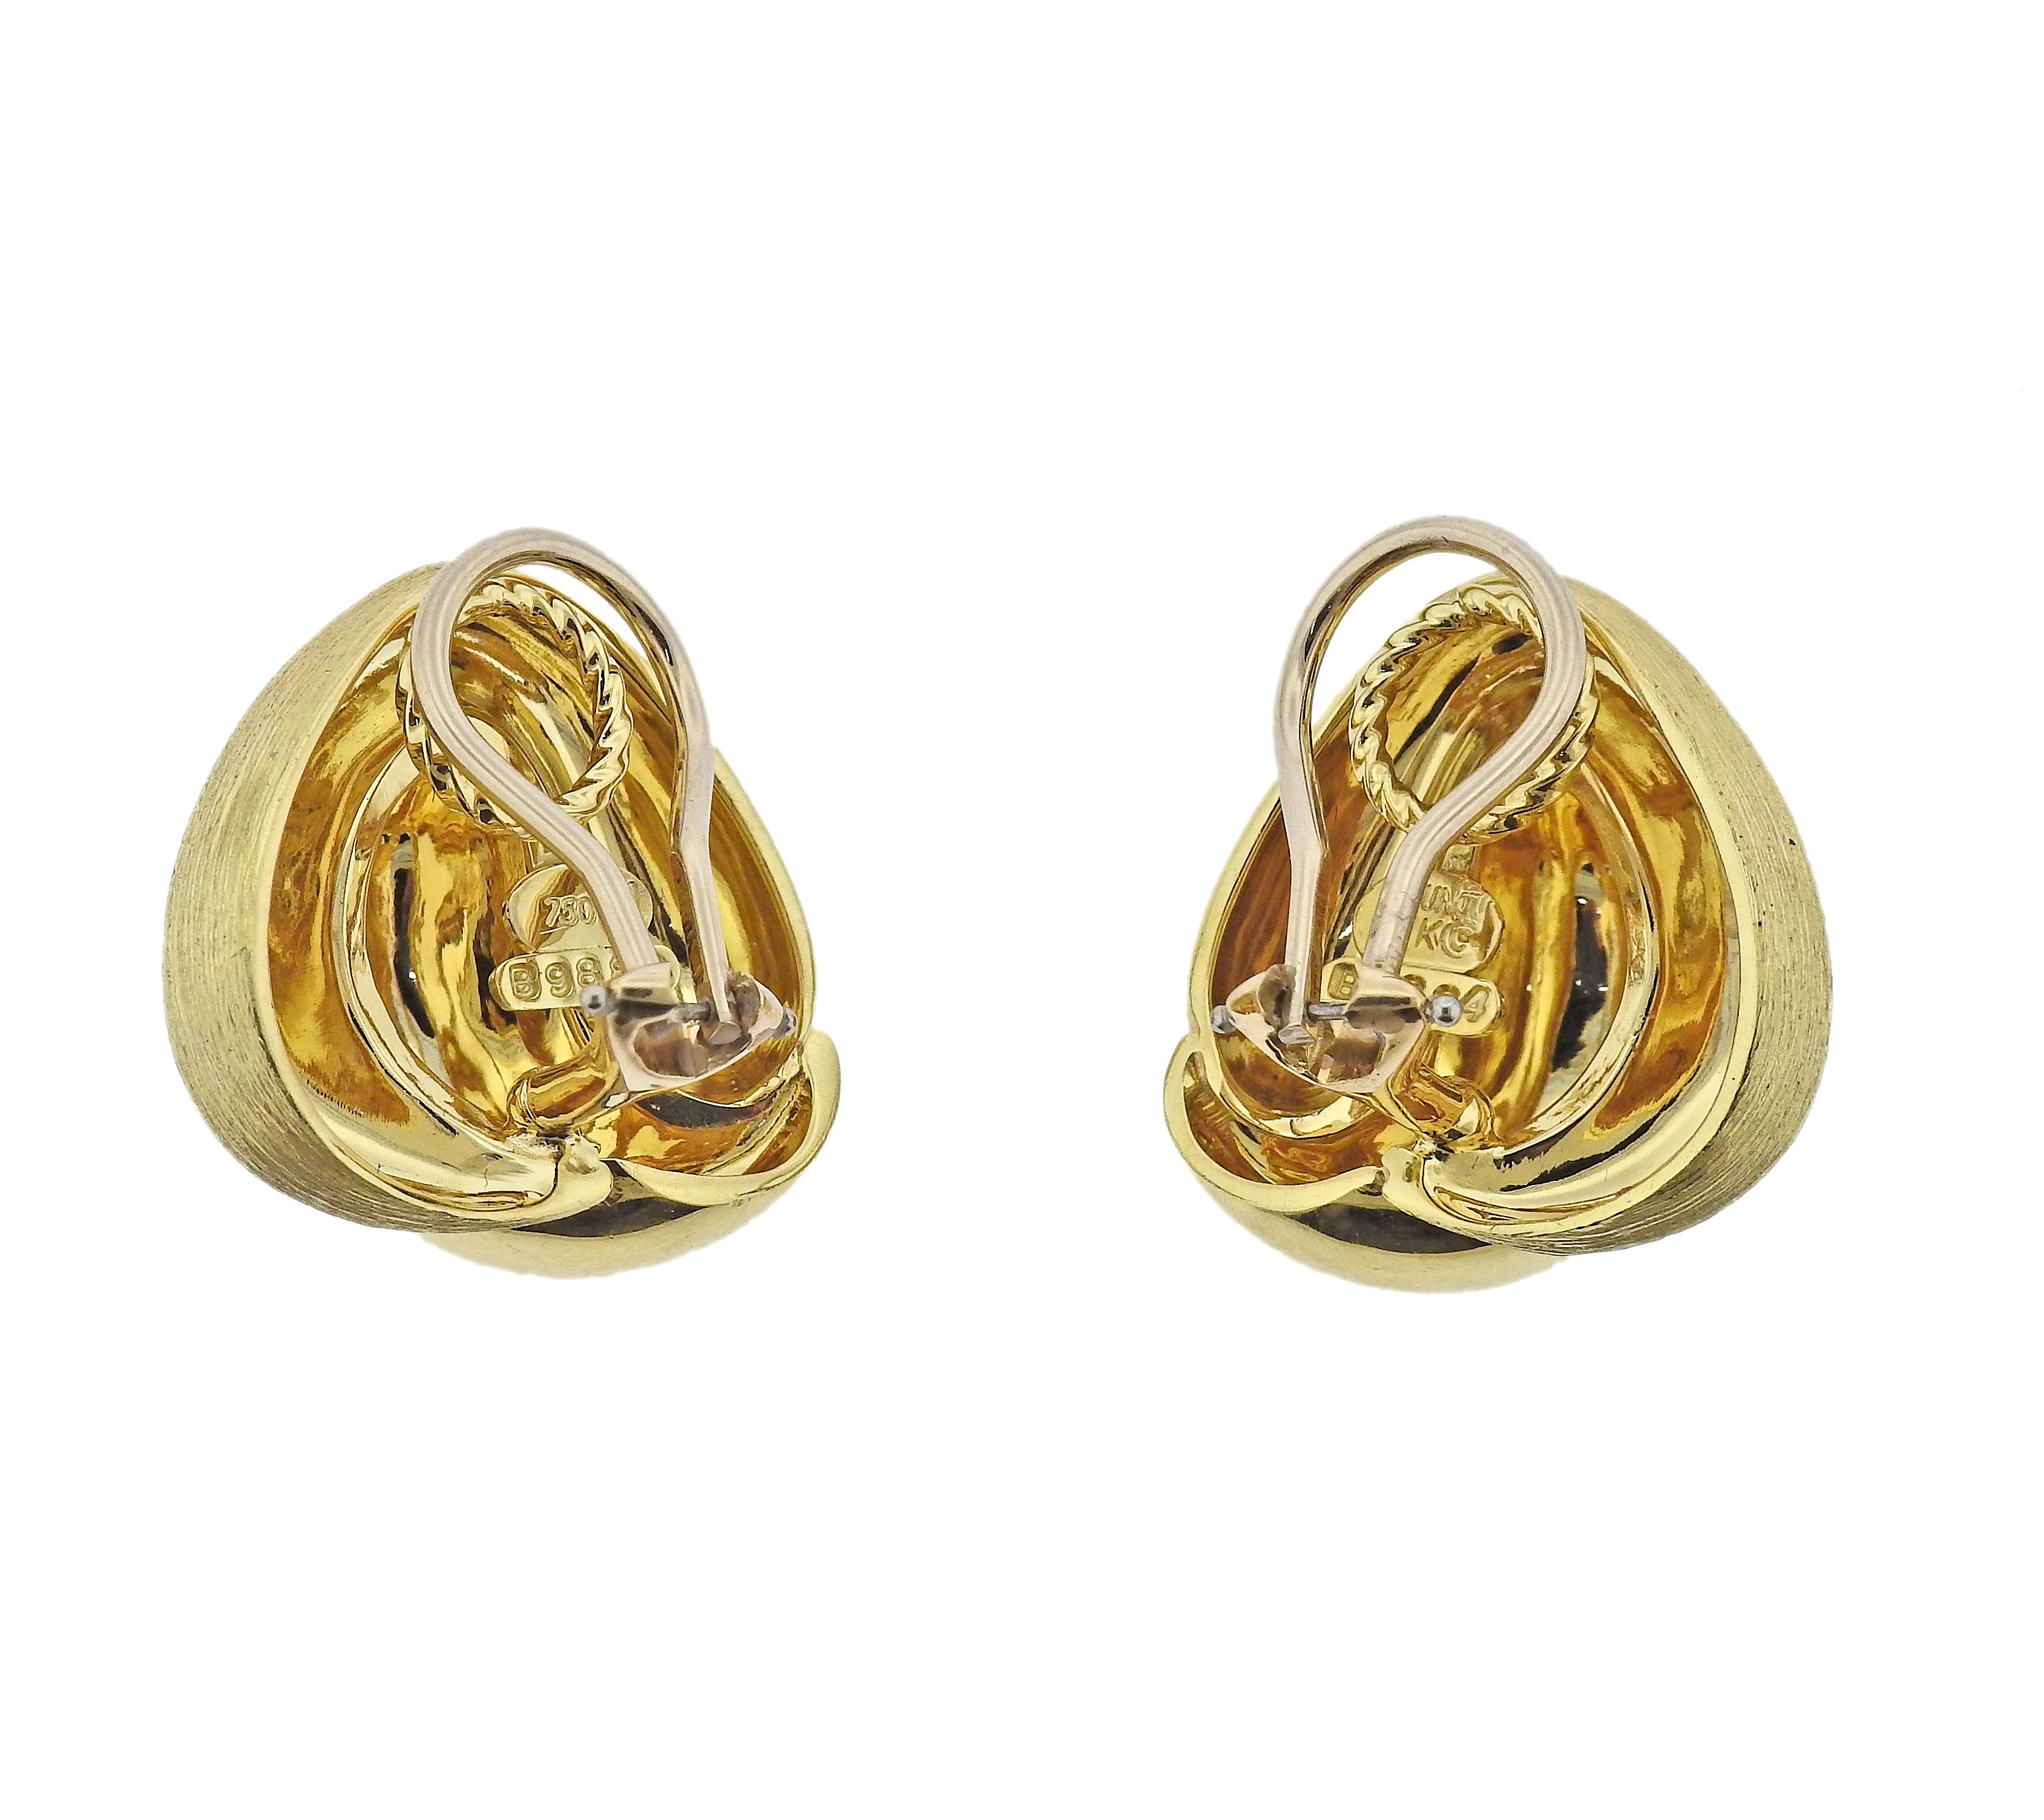 Pair of 18k signature brushed and high polish gold earrings by Henry Dunay. Earrings are 23mm x 22mm. Marked: 69884, 18k, Dunay. Weight - 26.5 grams.